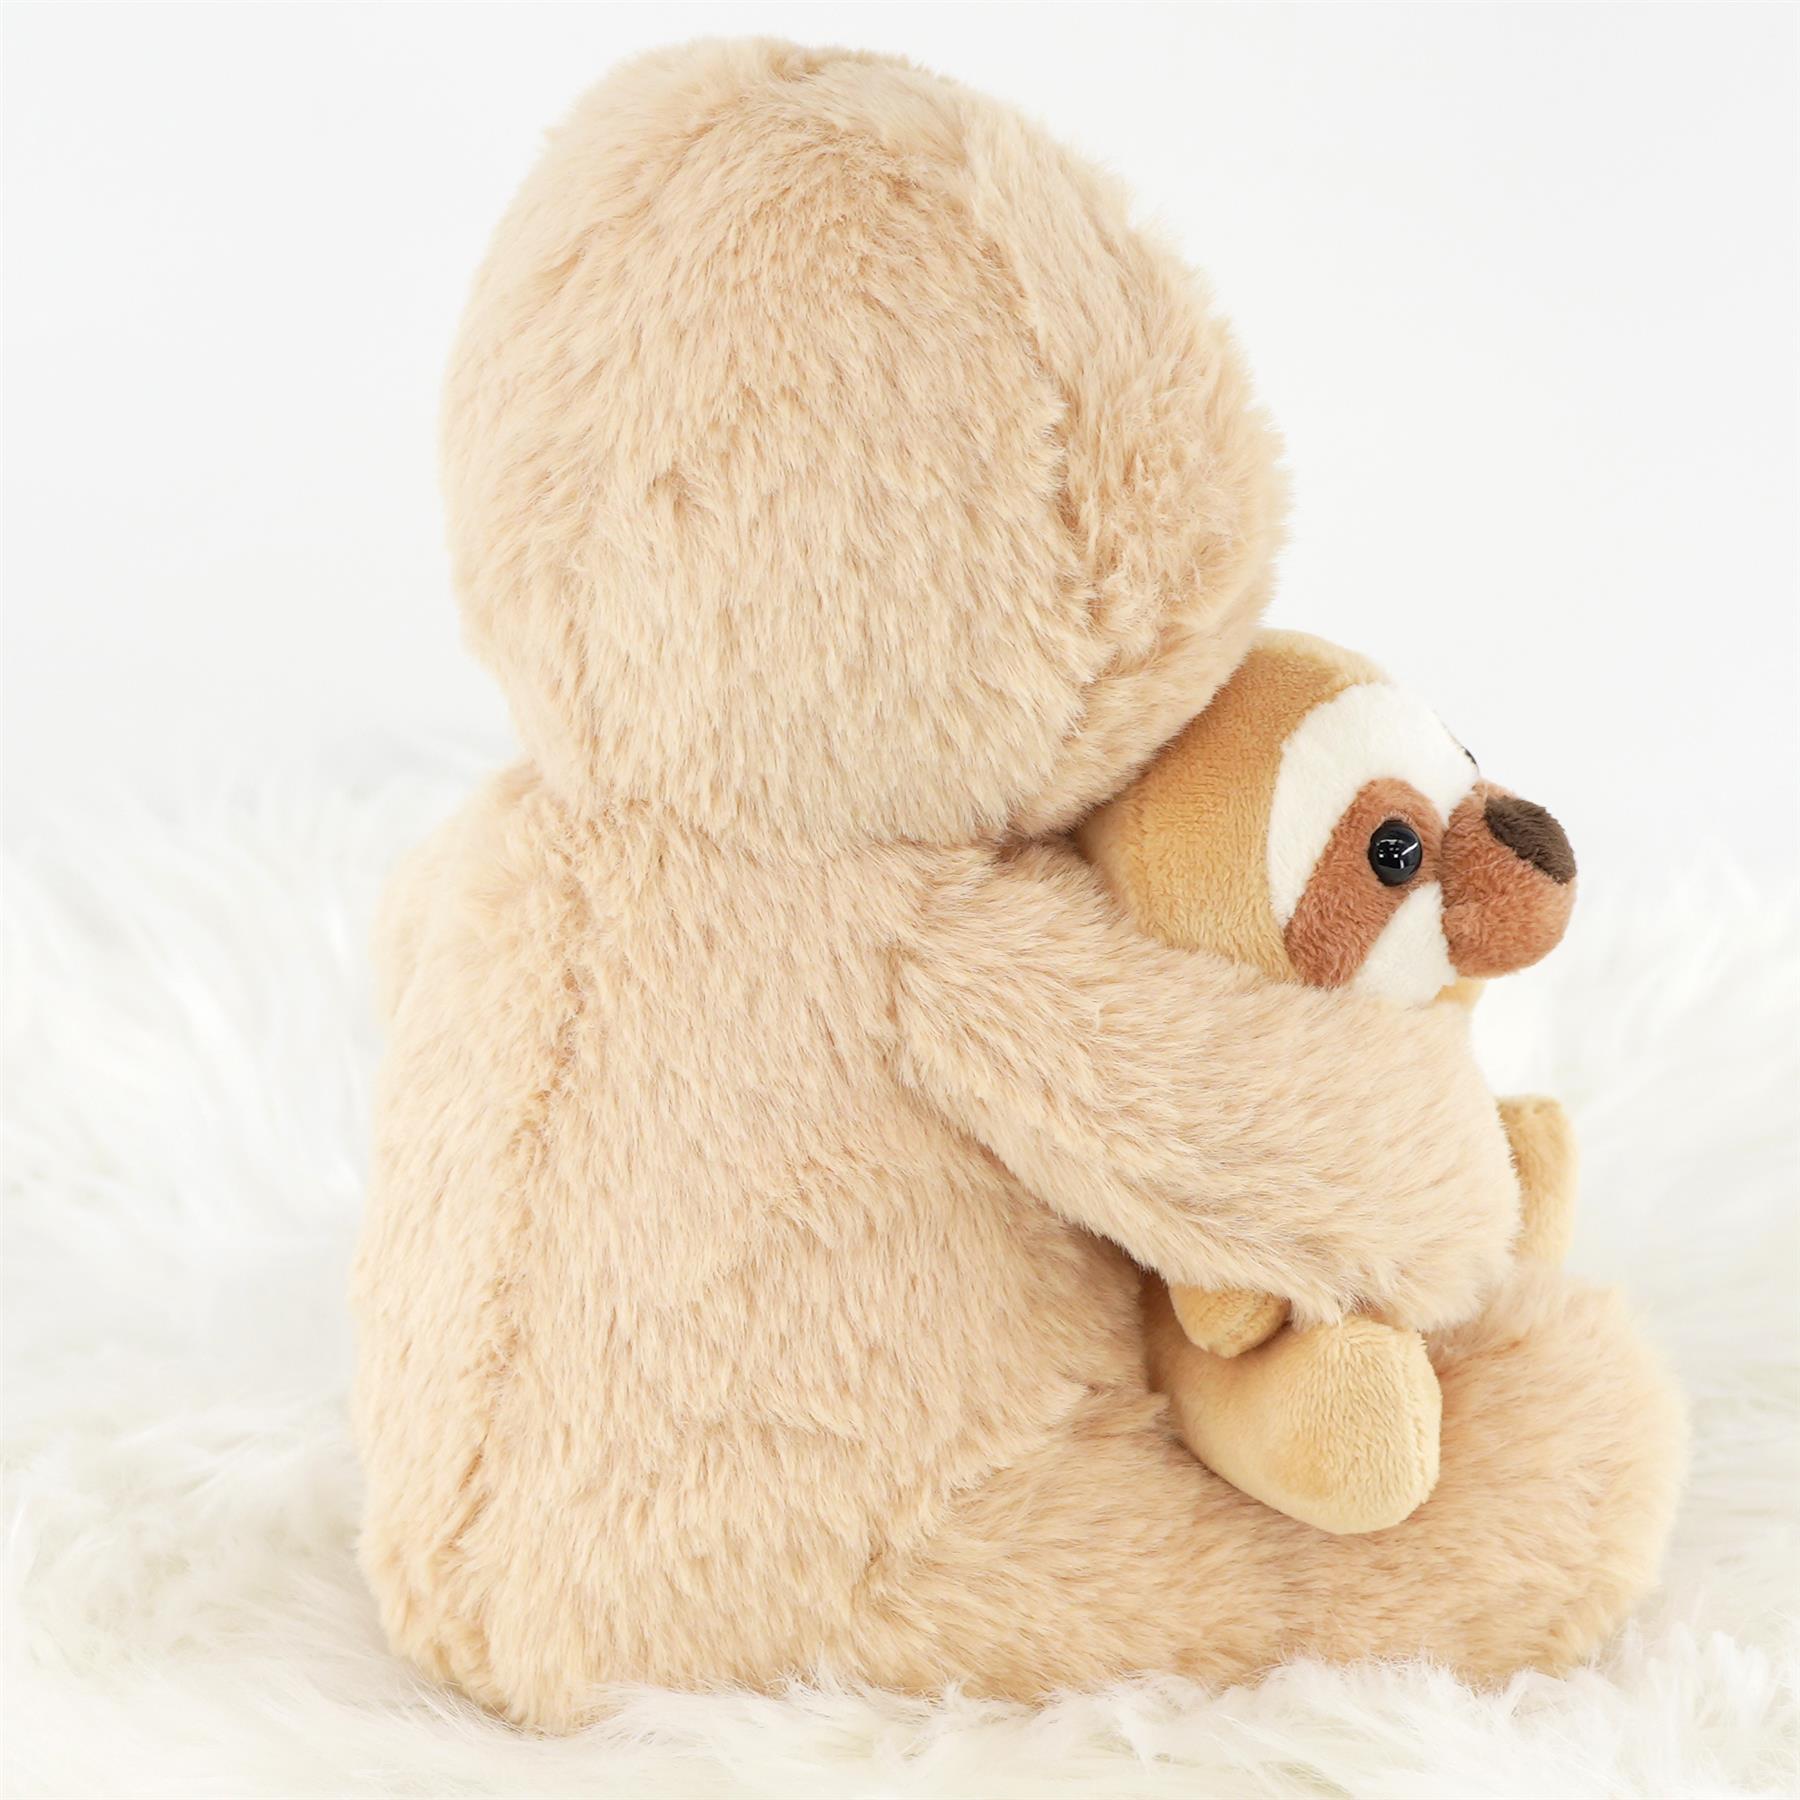 Mum and Baby Sloth Plush Toys by The Magic Toy Shop - The Magic Toy Shop